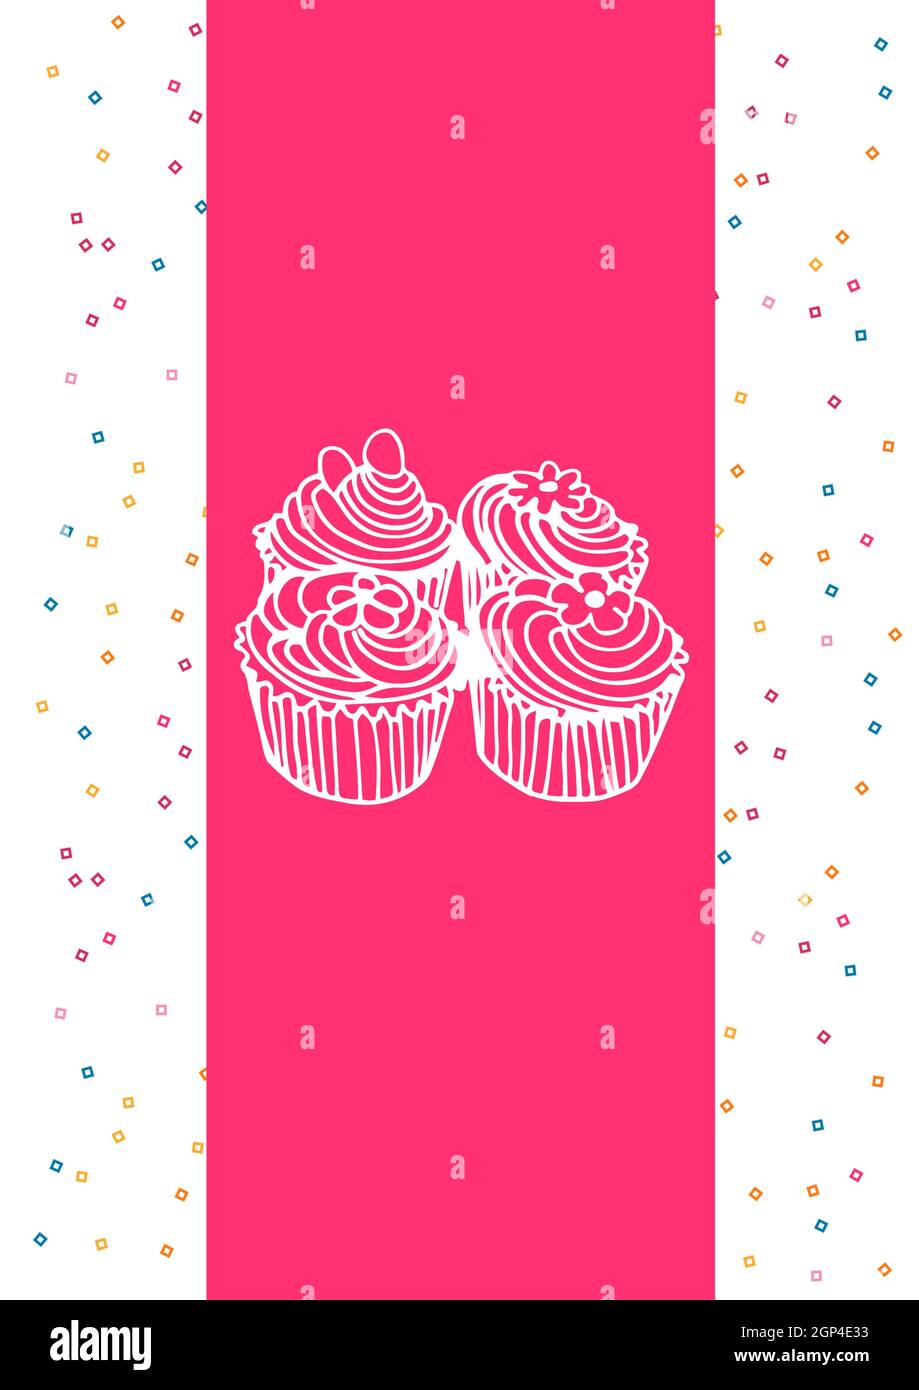 Composition of cupcake icons and colourful squares on white background Stock Photo